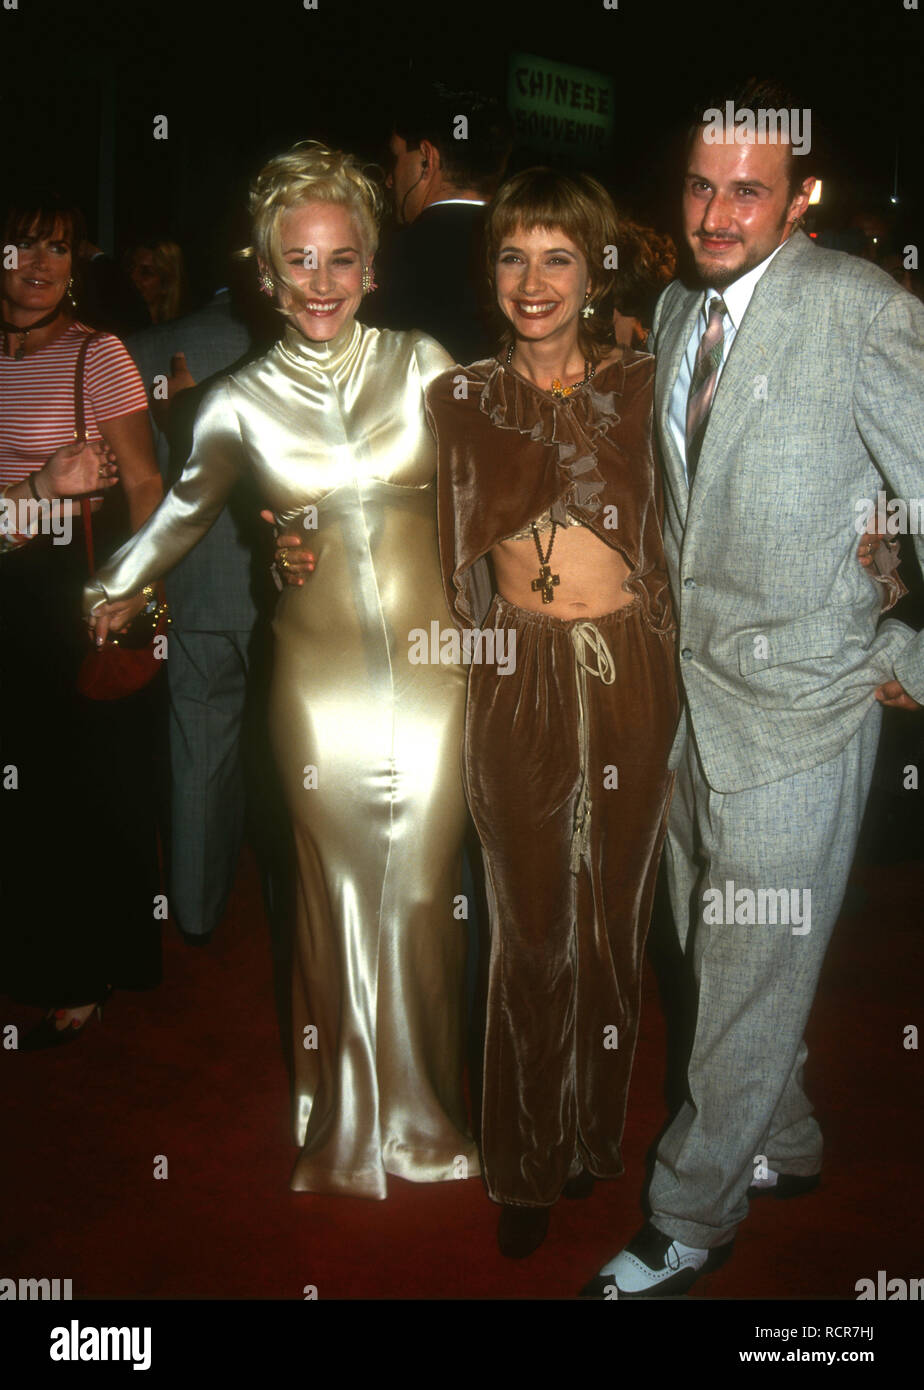 HOLLYWOOD, CA - SEPTEMBER 8: Actress Patricia Arquette, actress Rosanna Arquette and actor David Arquette attend Warner Bros. Pictures' 'True Romance' Premiere on September 8, 1993 at Mann's Chinese Theatre in Hollywood, California. Photo by Barry King/Alamy Stock Photo Stock Photo